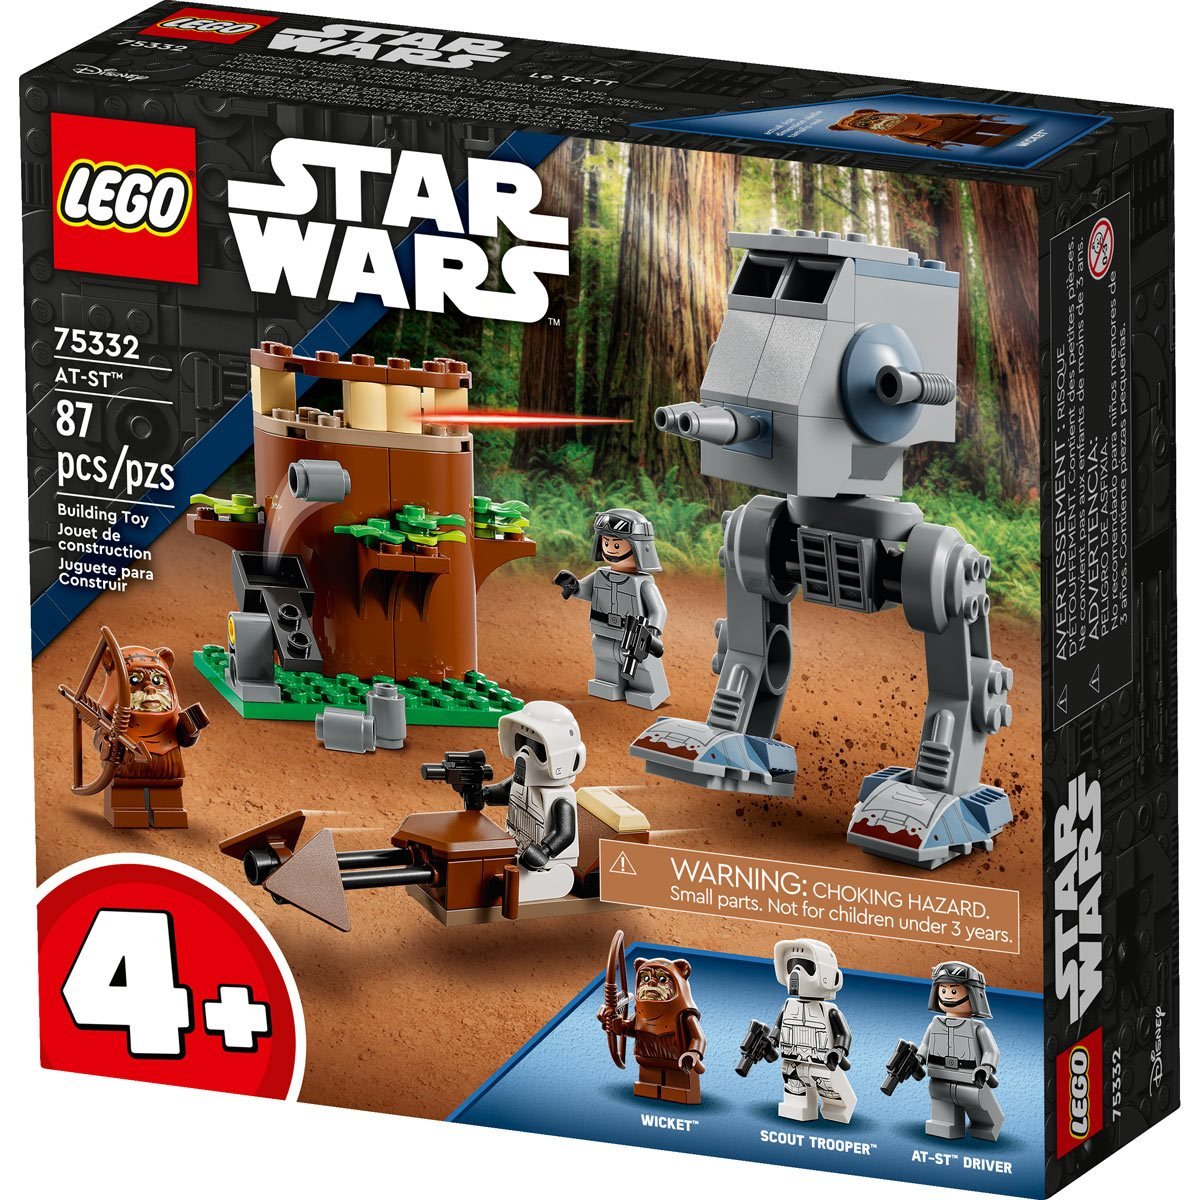 AT-ST™ - Lego Star Wars 75332